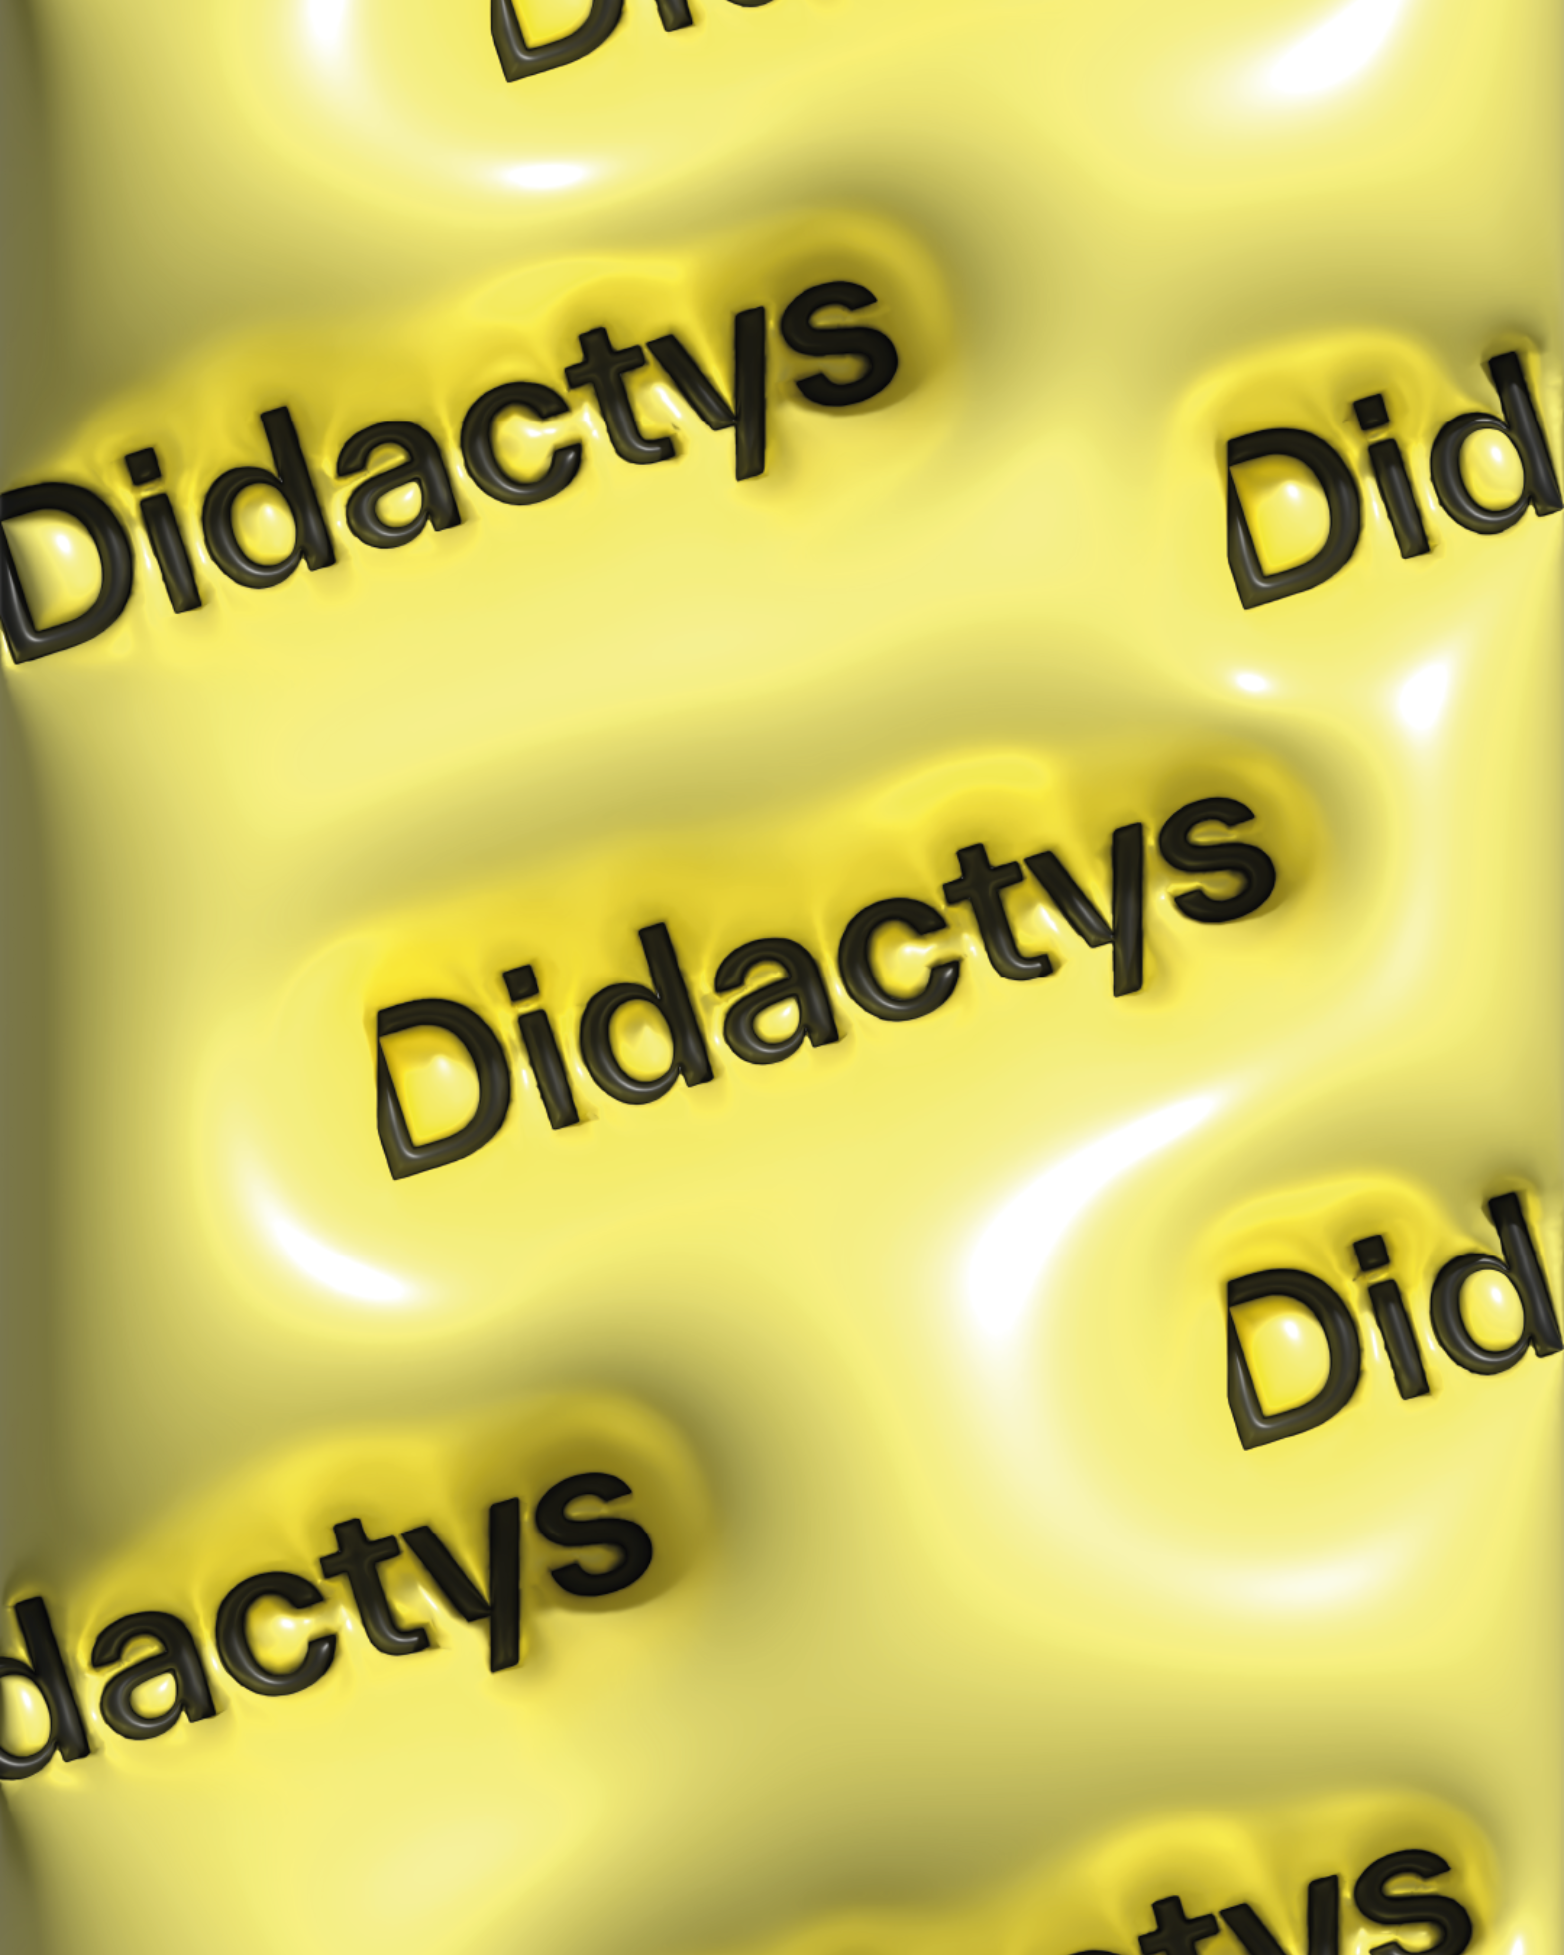 didactys-wallpaper-3d